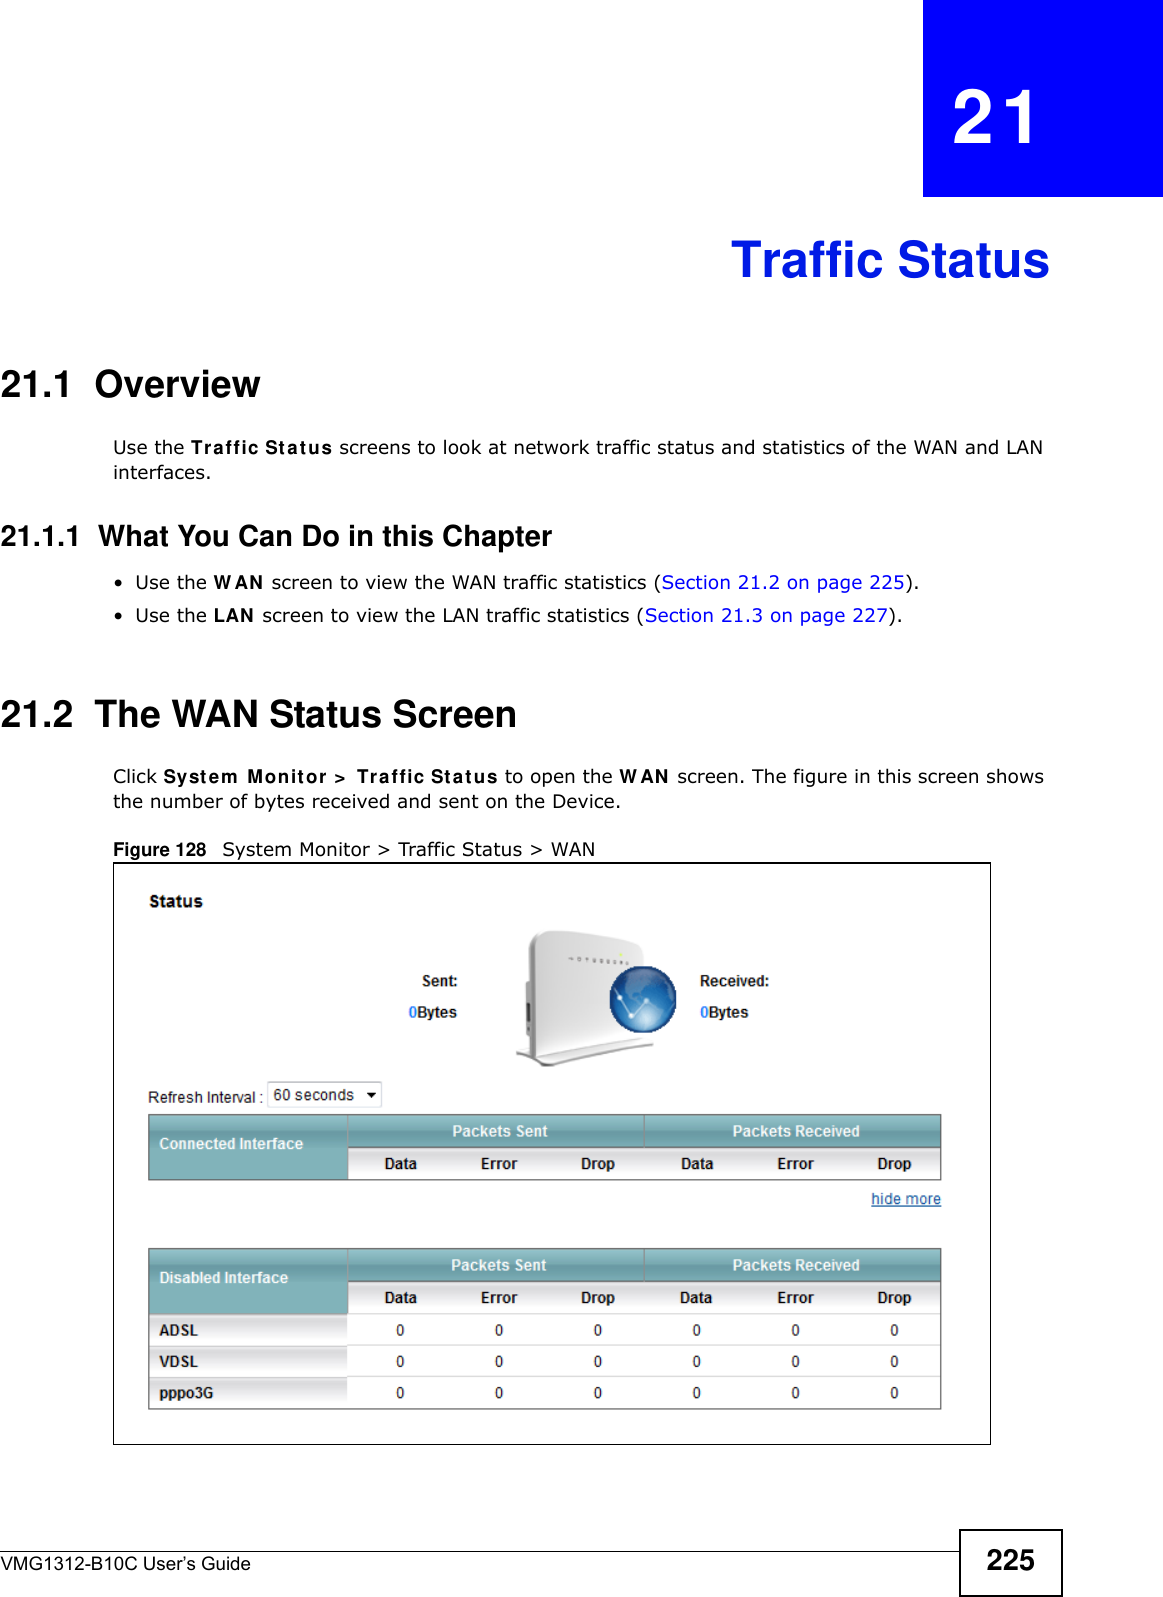 VMG1312-B10C User’s Guide 225CHAPTER   21Traffic Status21.1  OverviewUse the Tr a ffic St at us screens to look at network traffic status and statistics of the WAN and LAN interfaces. 21.1.1  What You Can Do in this Chapter•Use the W AN  screen to view the WAN traffic statistics (Section 21.2 on page 225).•Use the LAN  screen to view the LAN traffic statistics (Section 21.3 on page 227).21.2  The WAN Status Screen Click Syst e m  M onit or  &gt;  Tr affic St a t us to open the W AN  screen. The figure in this screen shows the number of bytes received and sent on the Device.Figure 128   System Monitor &gt; Traffic Status &gt; WAN